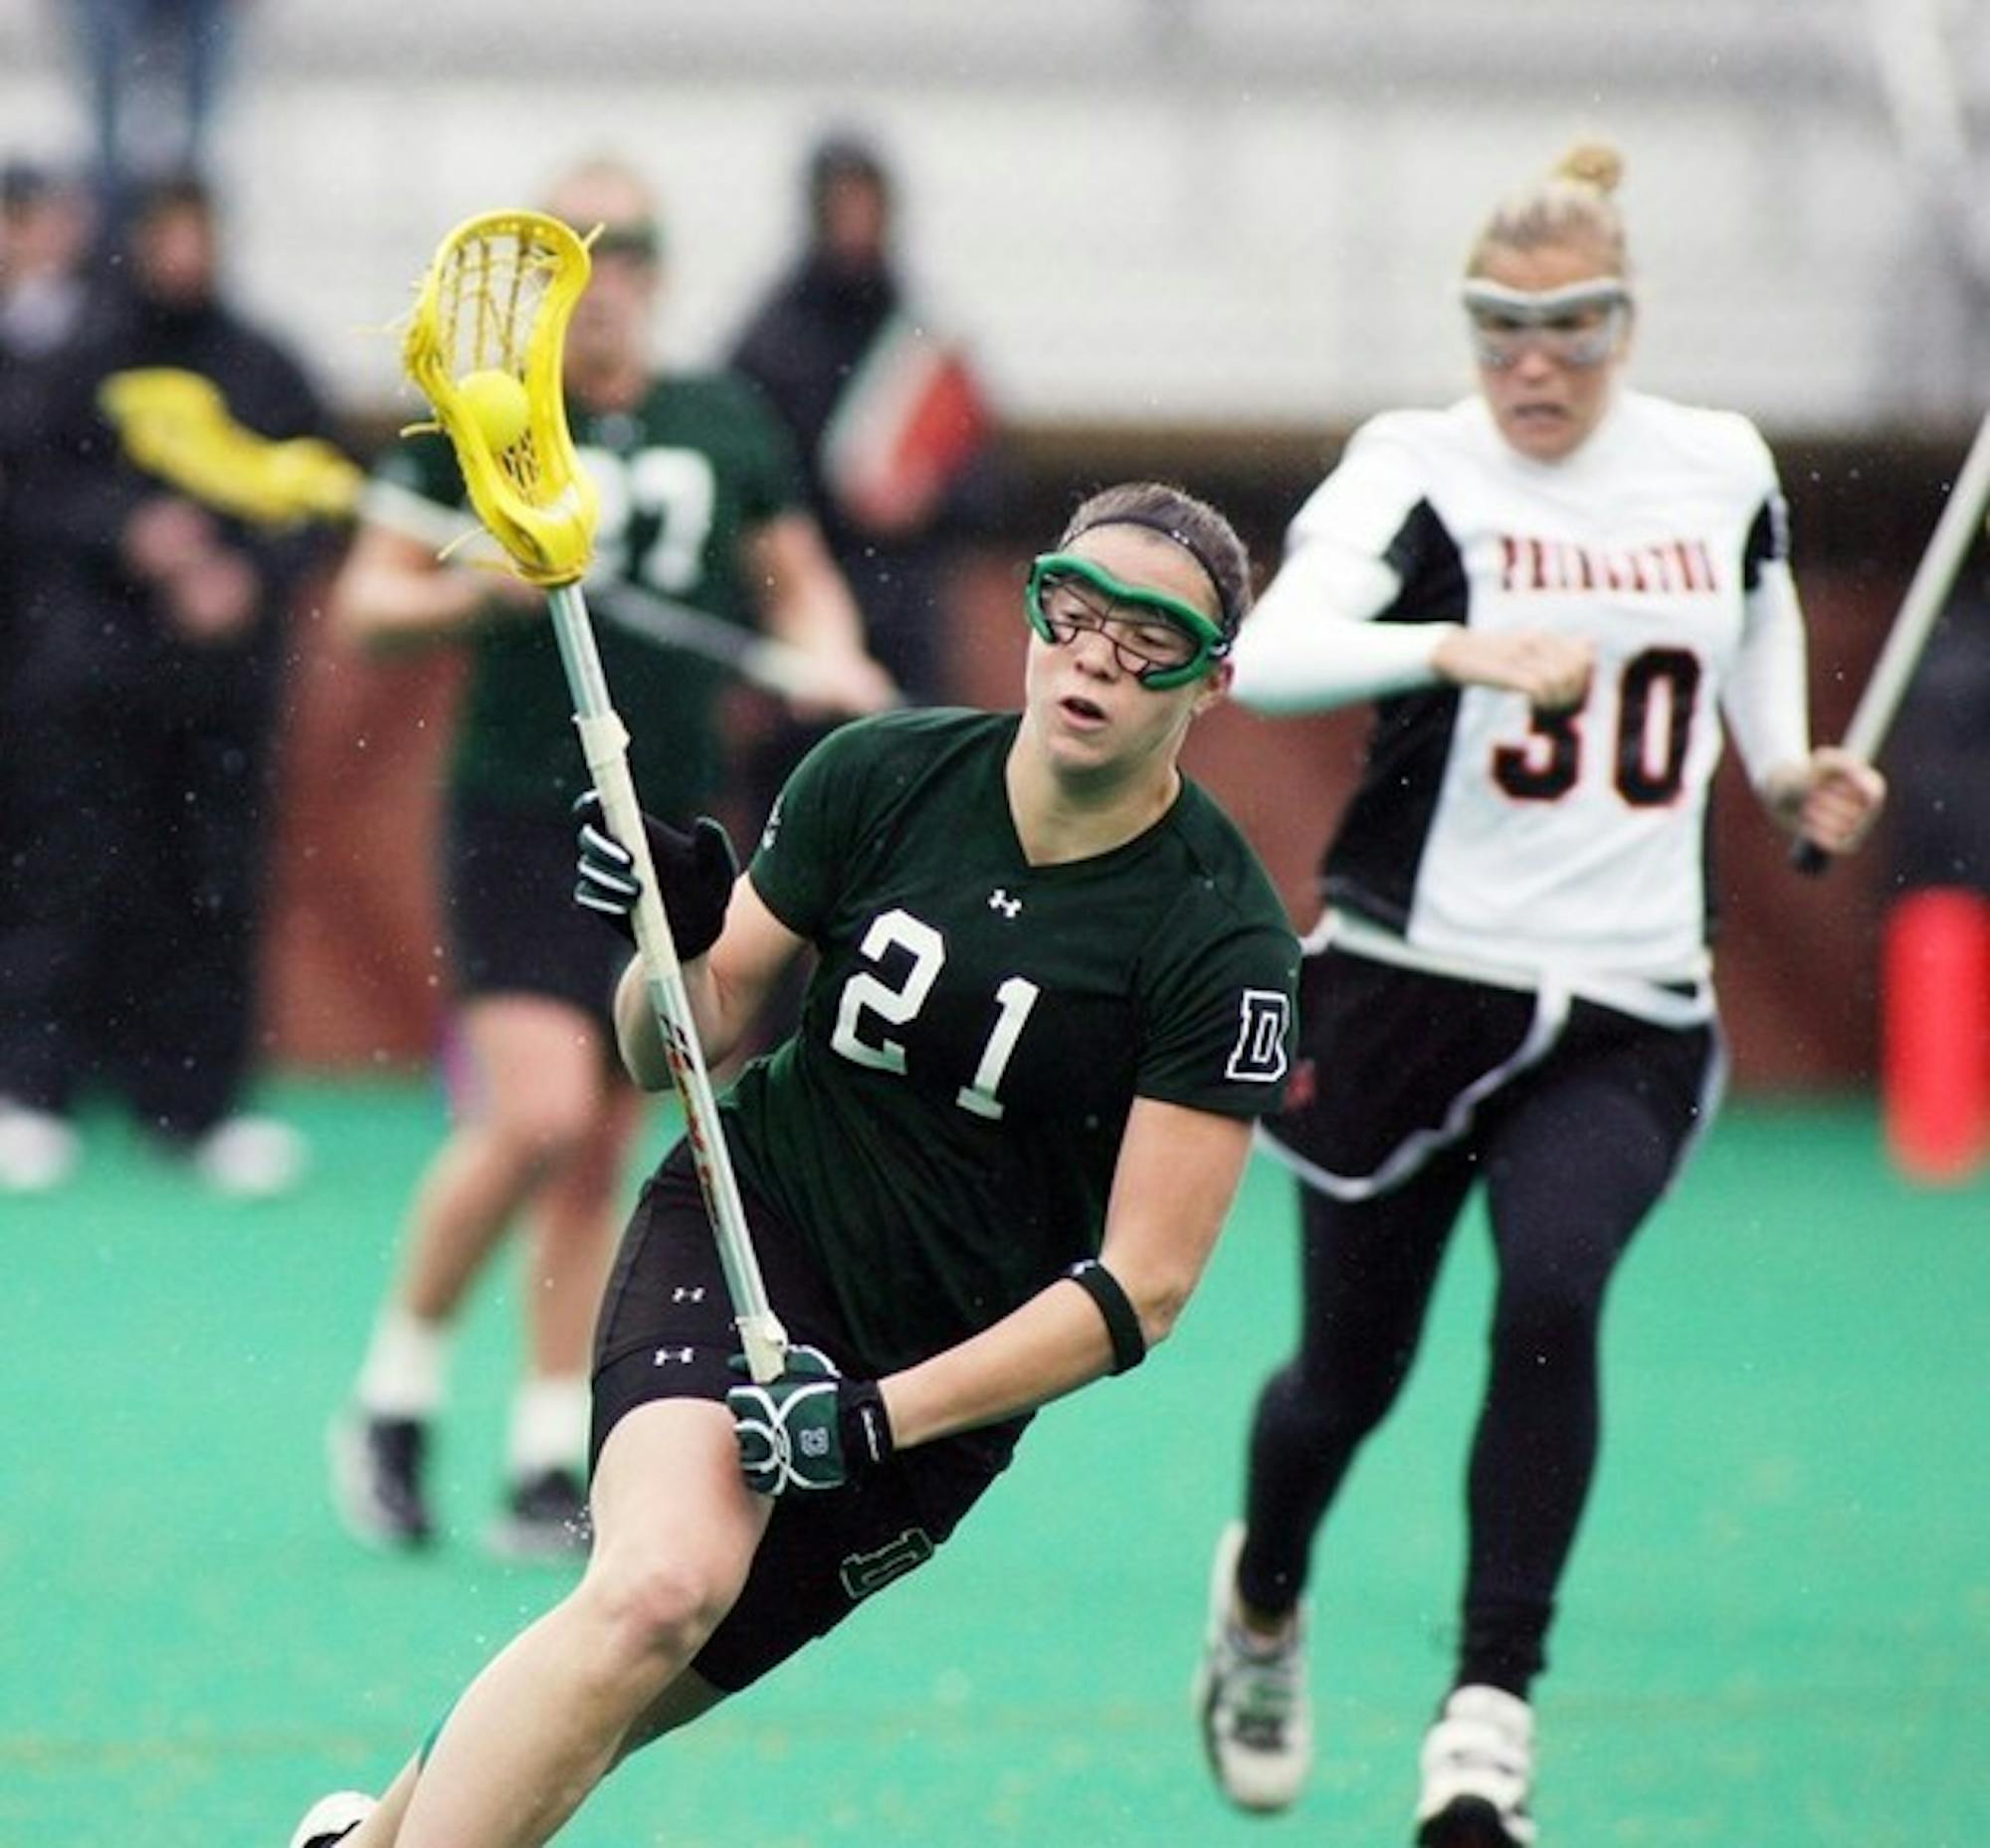 Rainy conditions could not slow down Jen Pittman '07's stellar play of late. The junior netted four goals on Saturday.